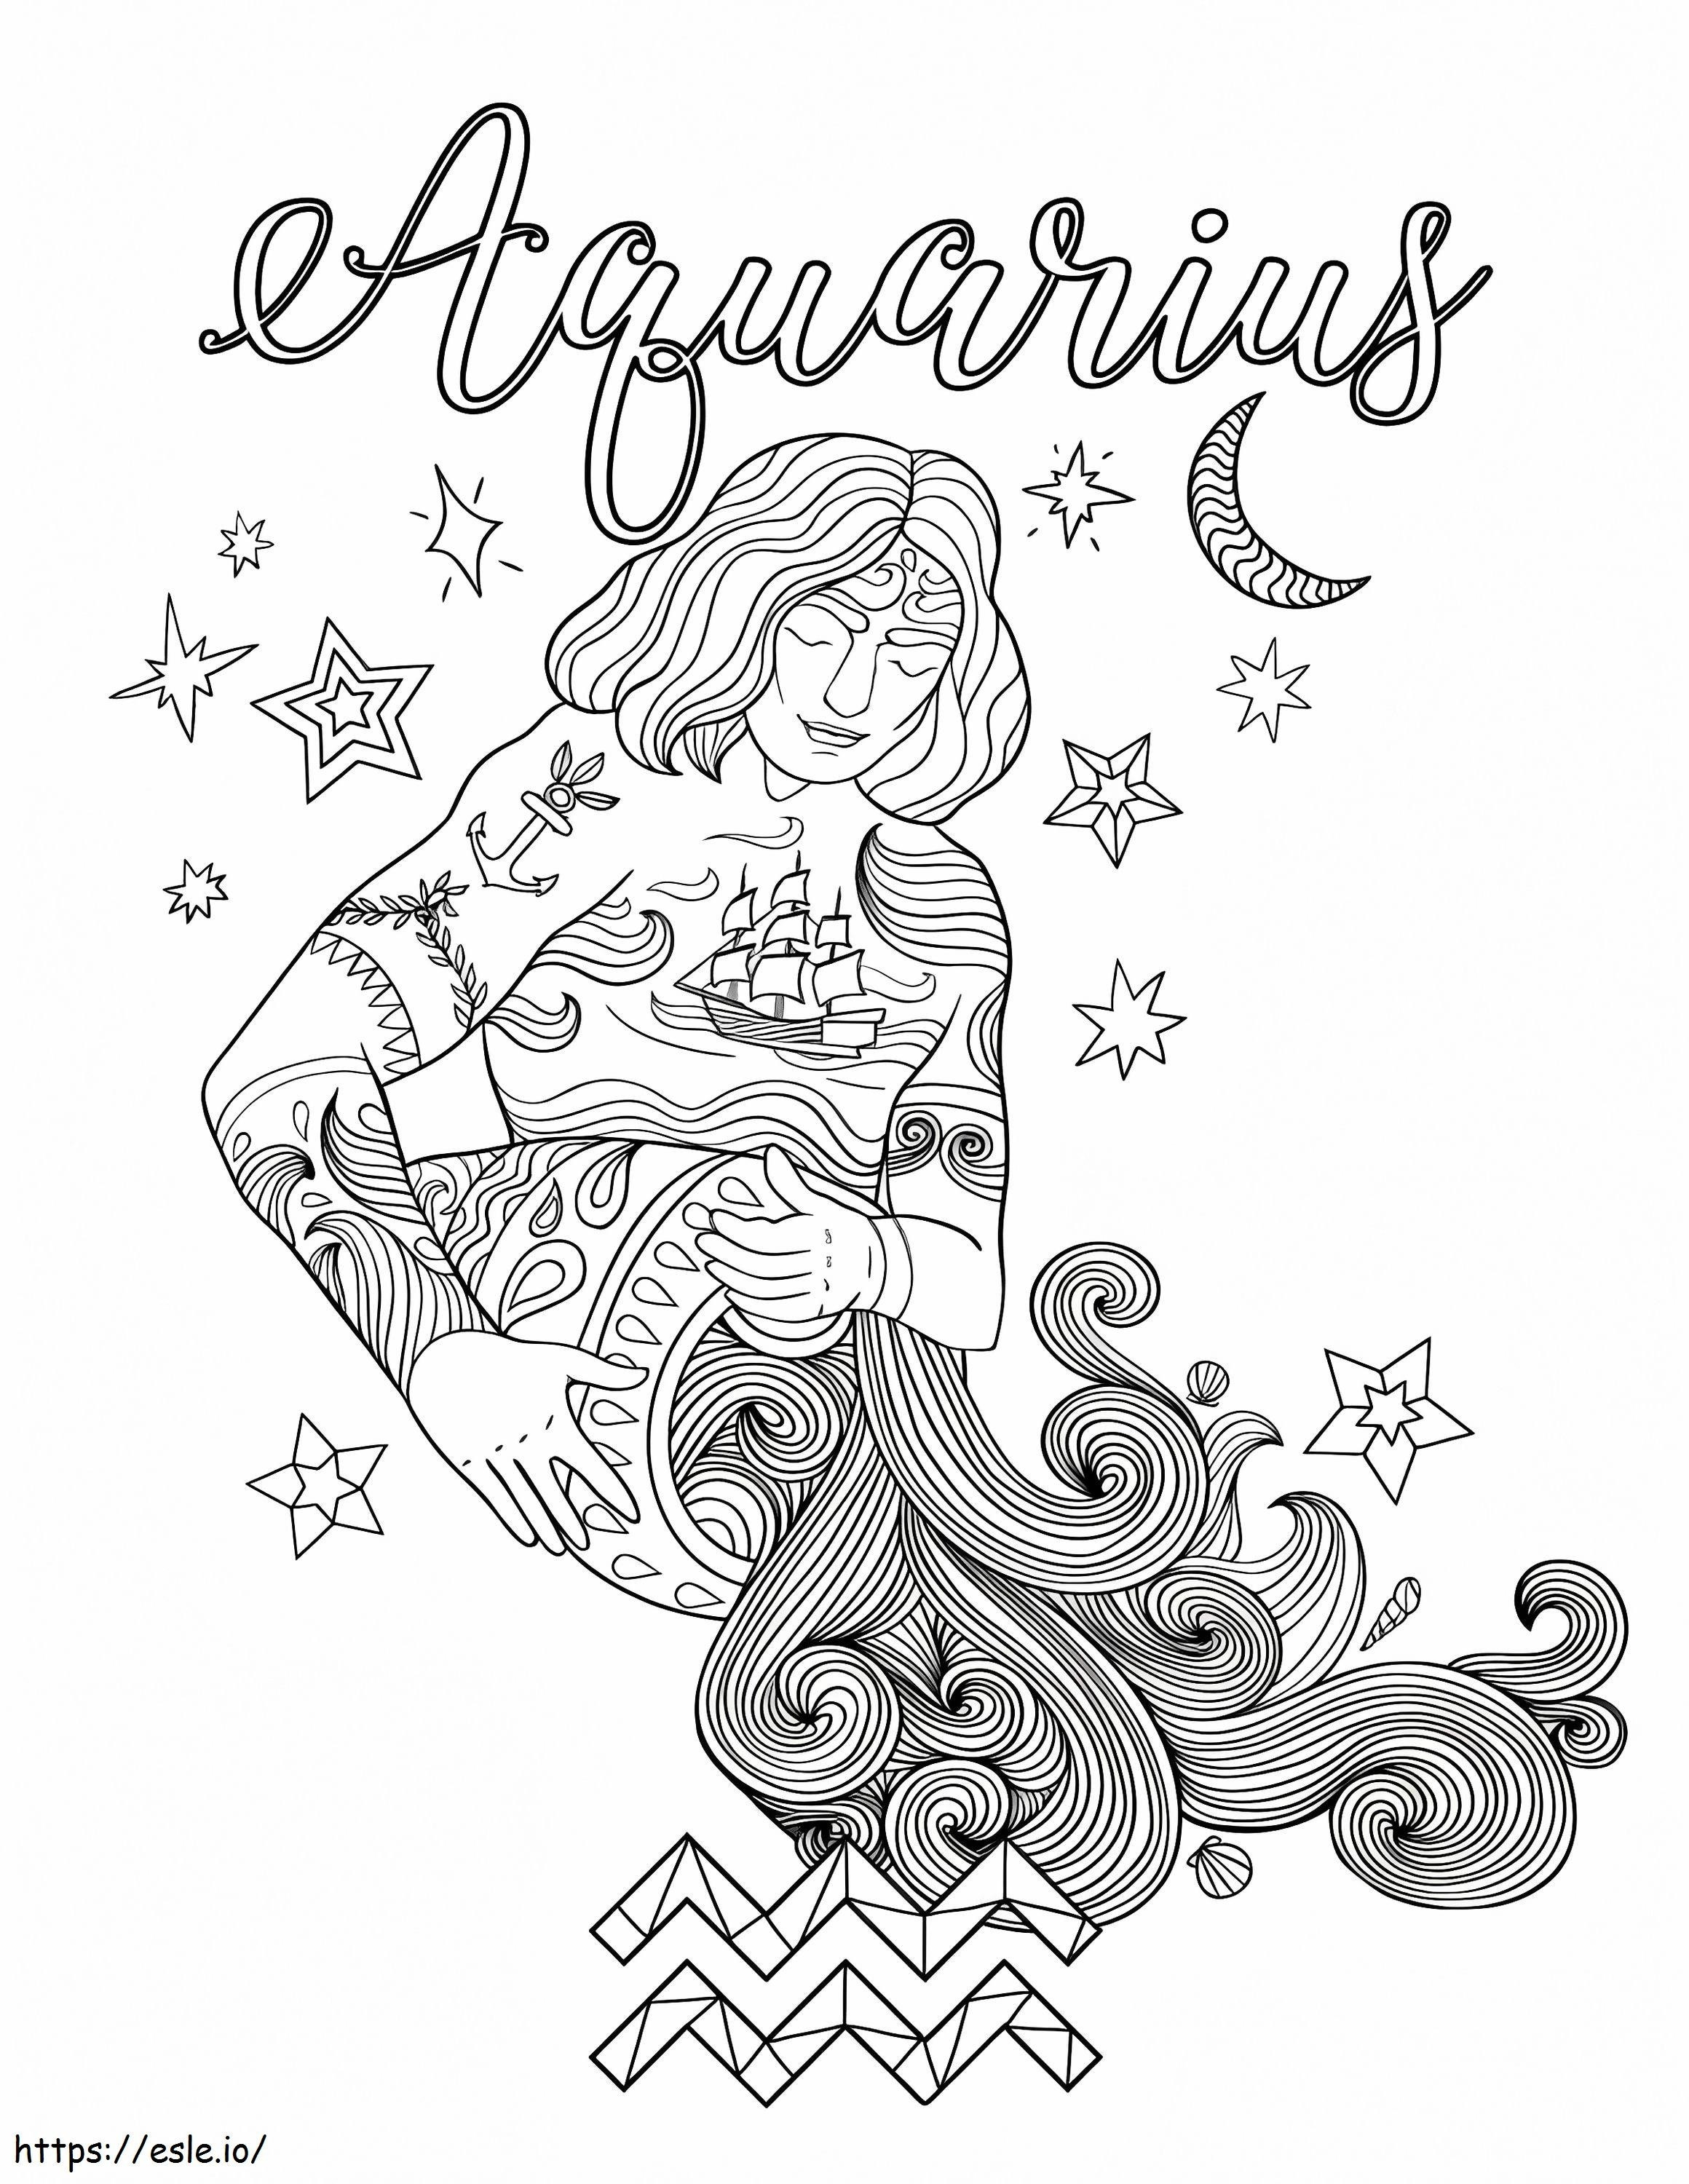 Awesome Aquarius coloring page